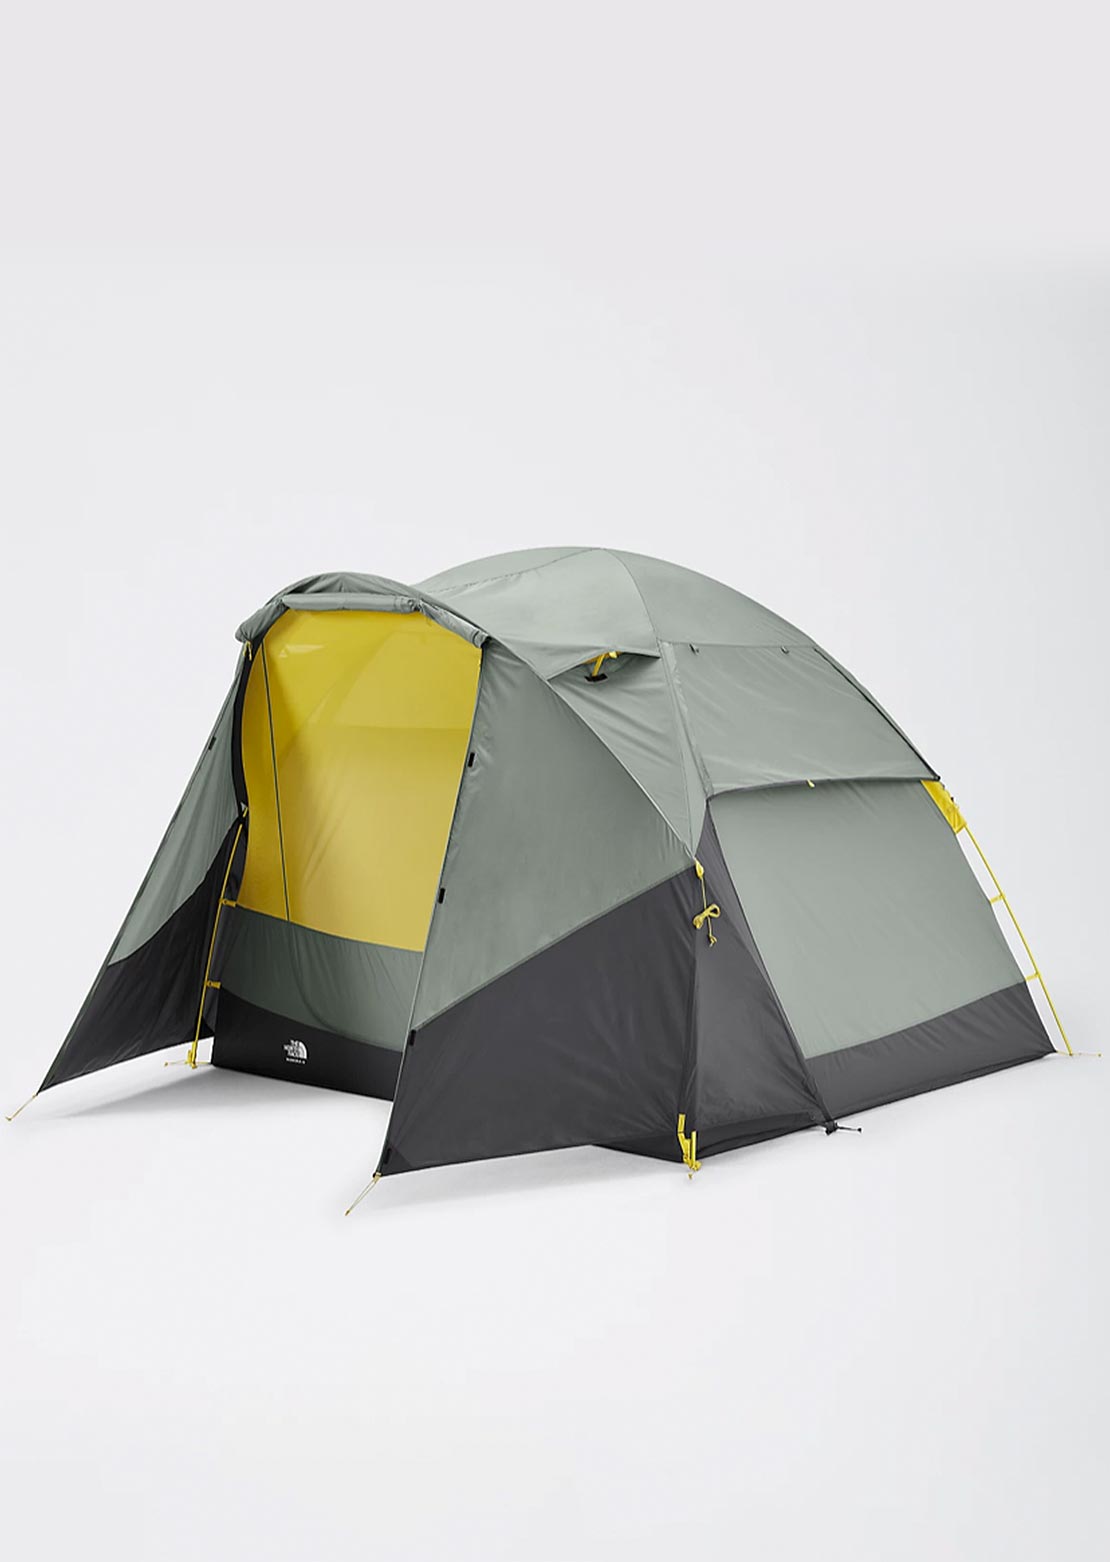 The North Face Wawona 4-Person Tent Agave Green/Asphalt Grey